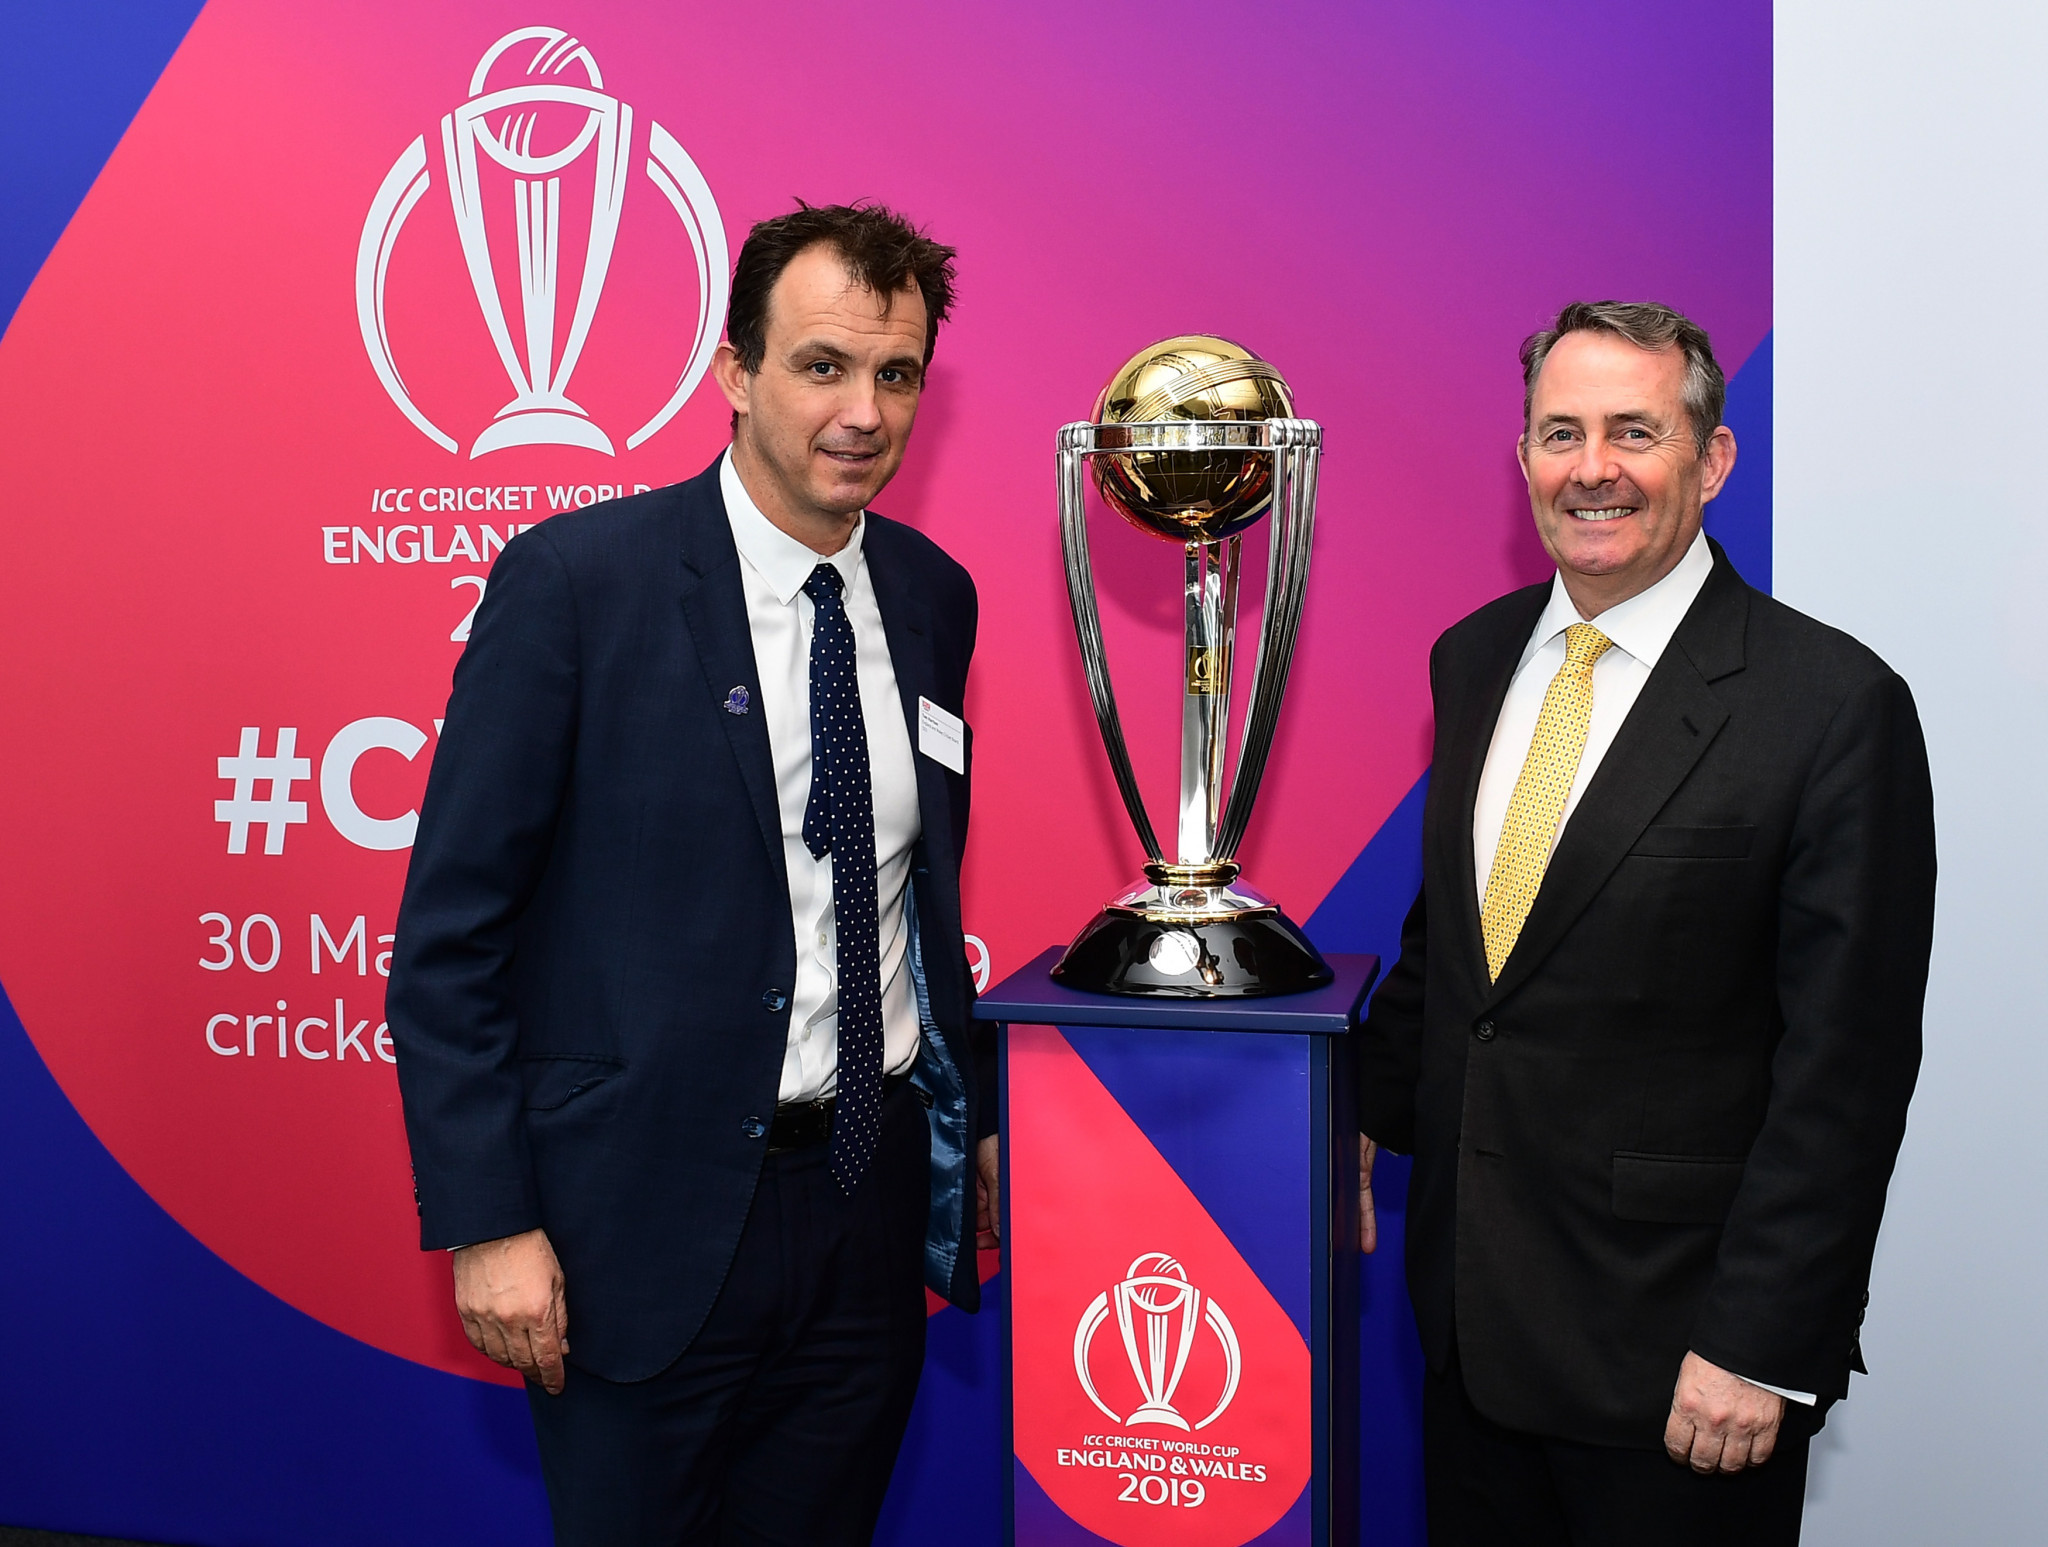 Harrison claims ECB will capitalise on hosting 2019 Cricket World Cup